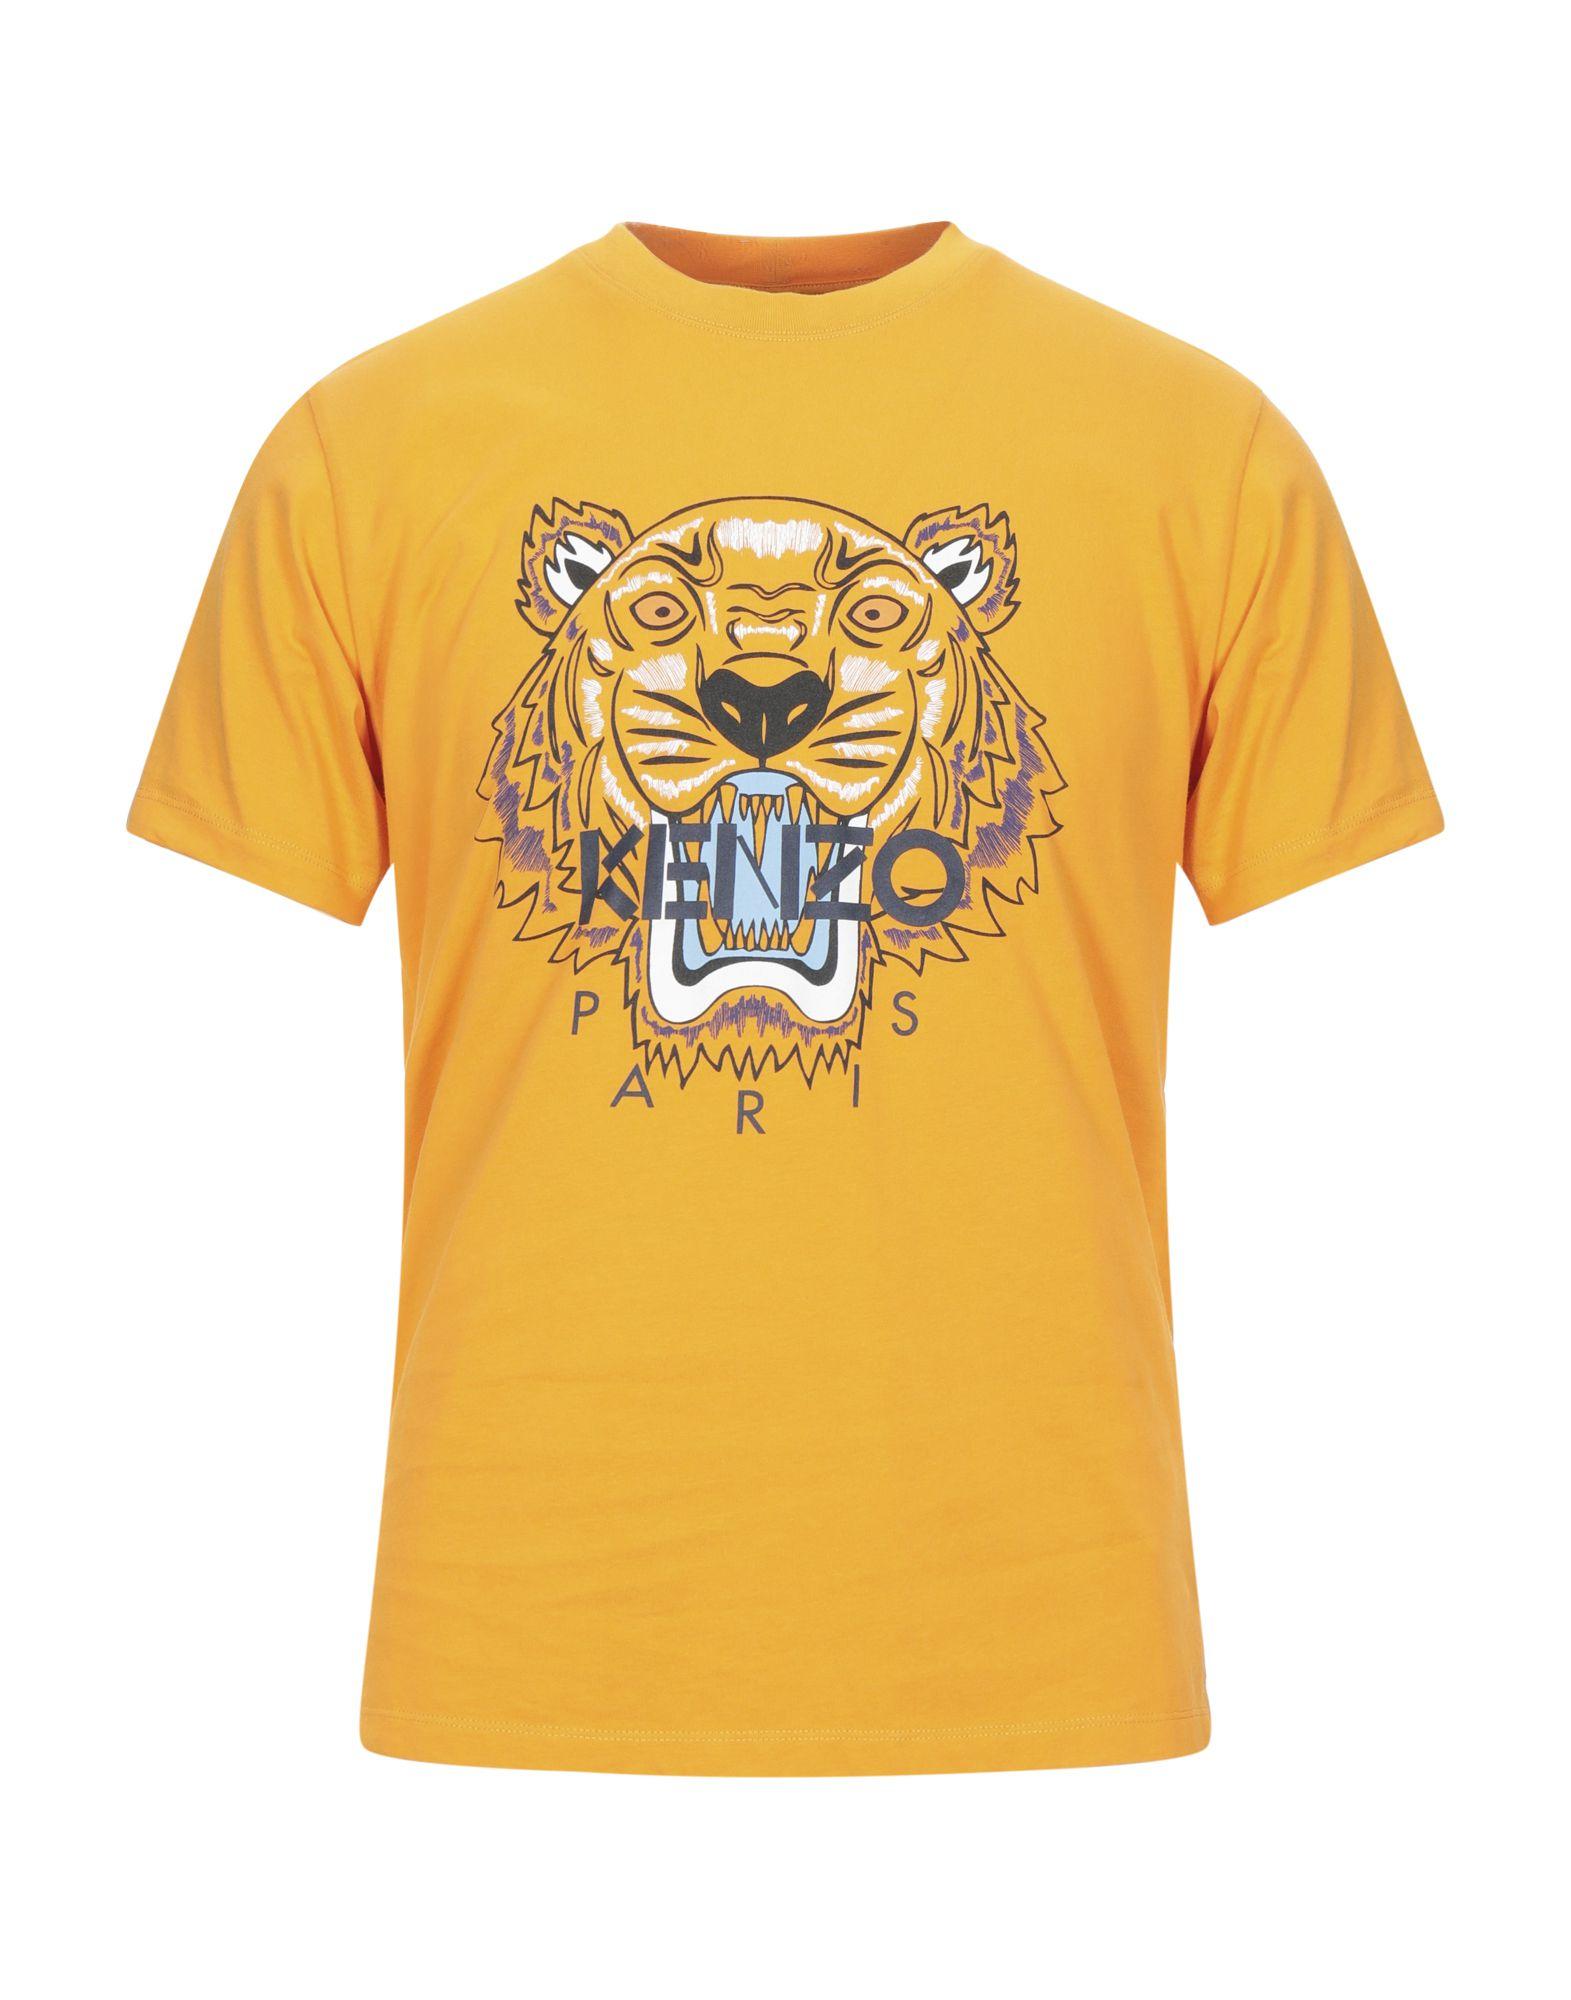 KENZO T-shirt in Yellow for Men | Lyst